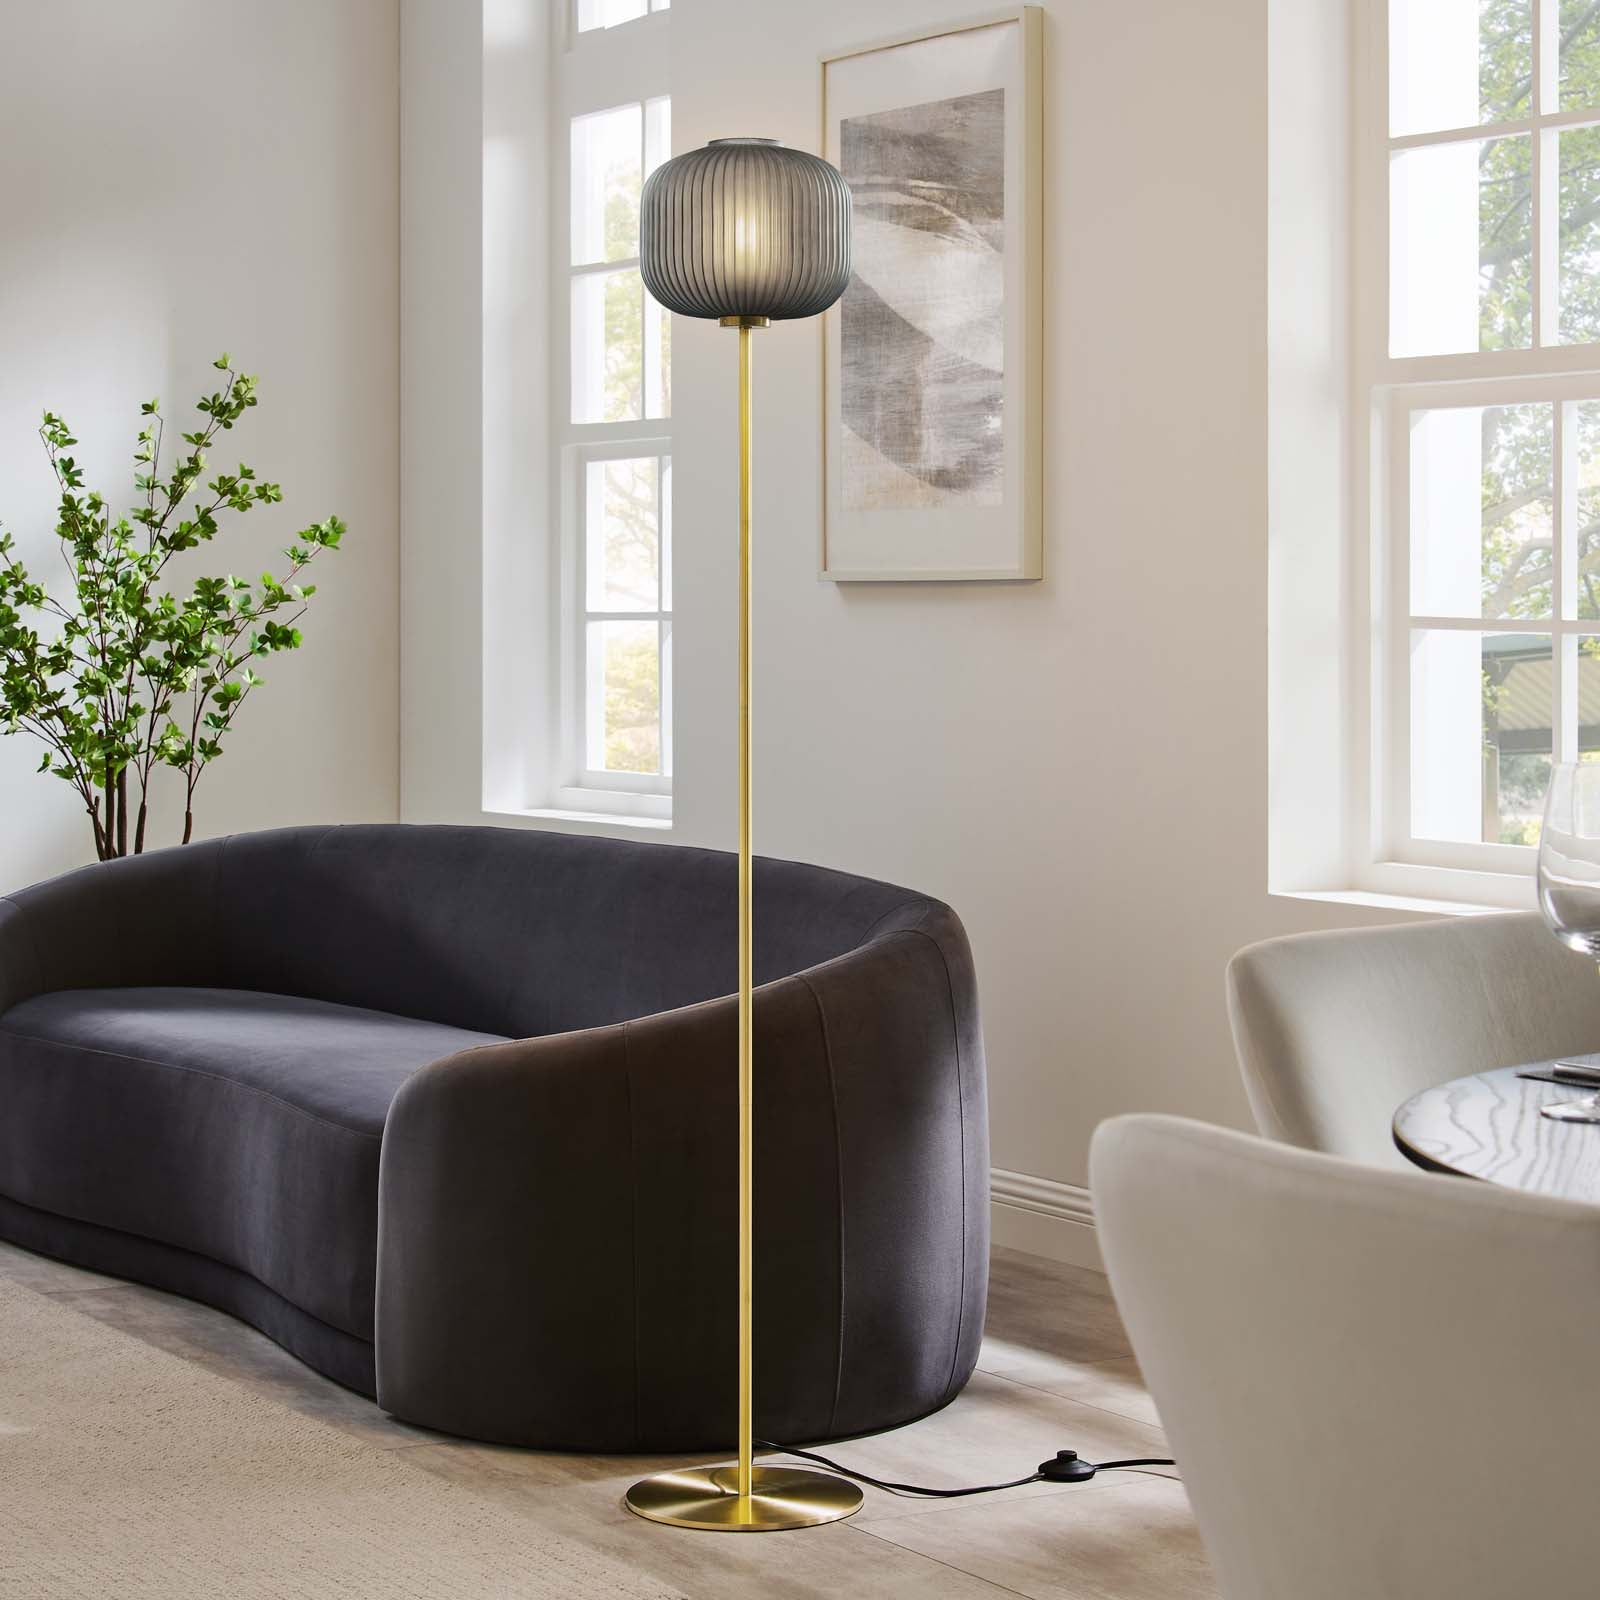 Modway Floor Lamps - Reprise Glass Sphere Glass And Metal Floor Lamp Black Satin Brass